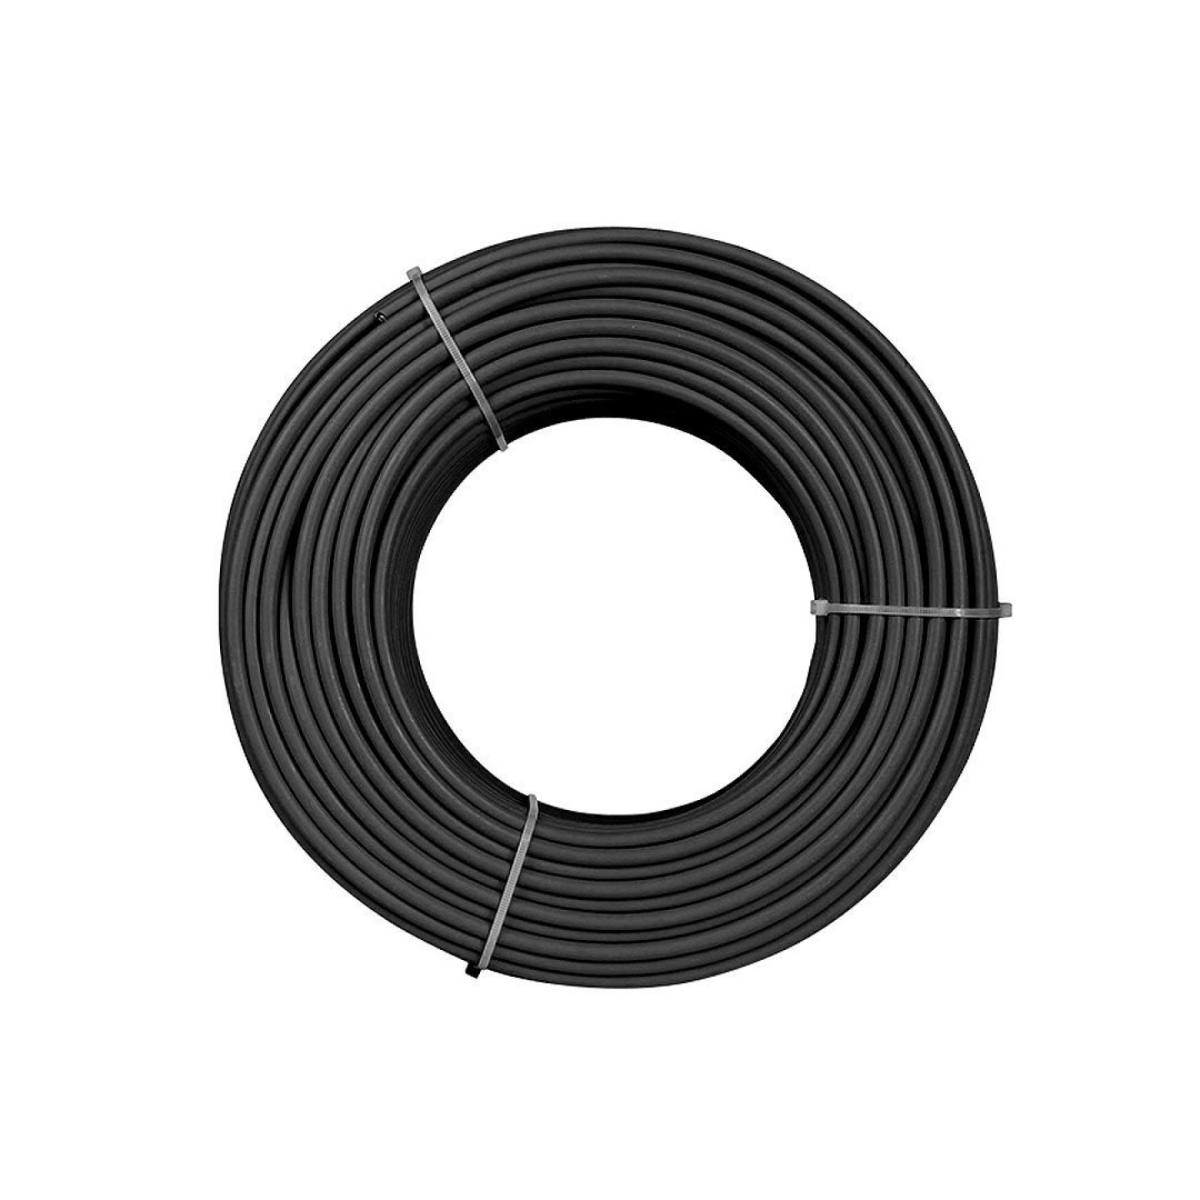 TommaTech 1.5 mm Solar Cable